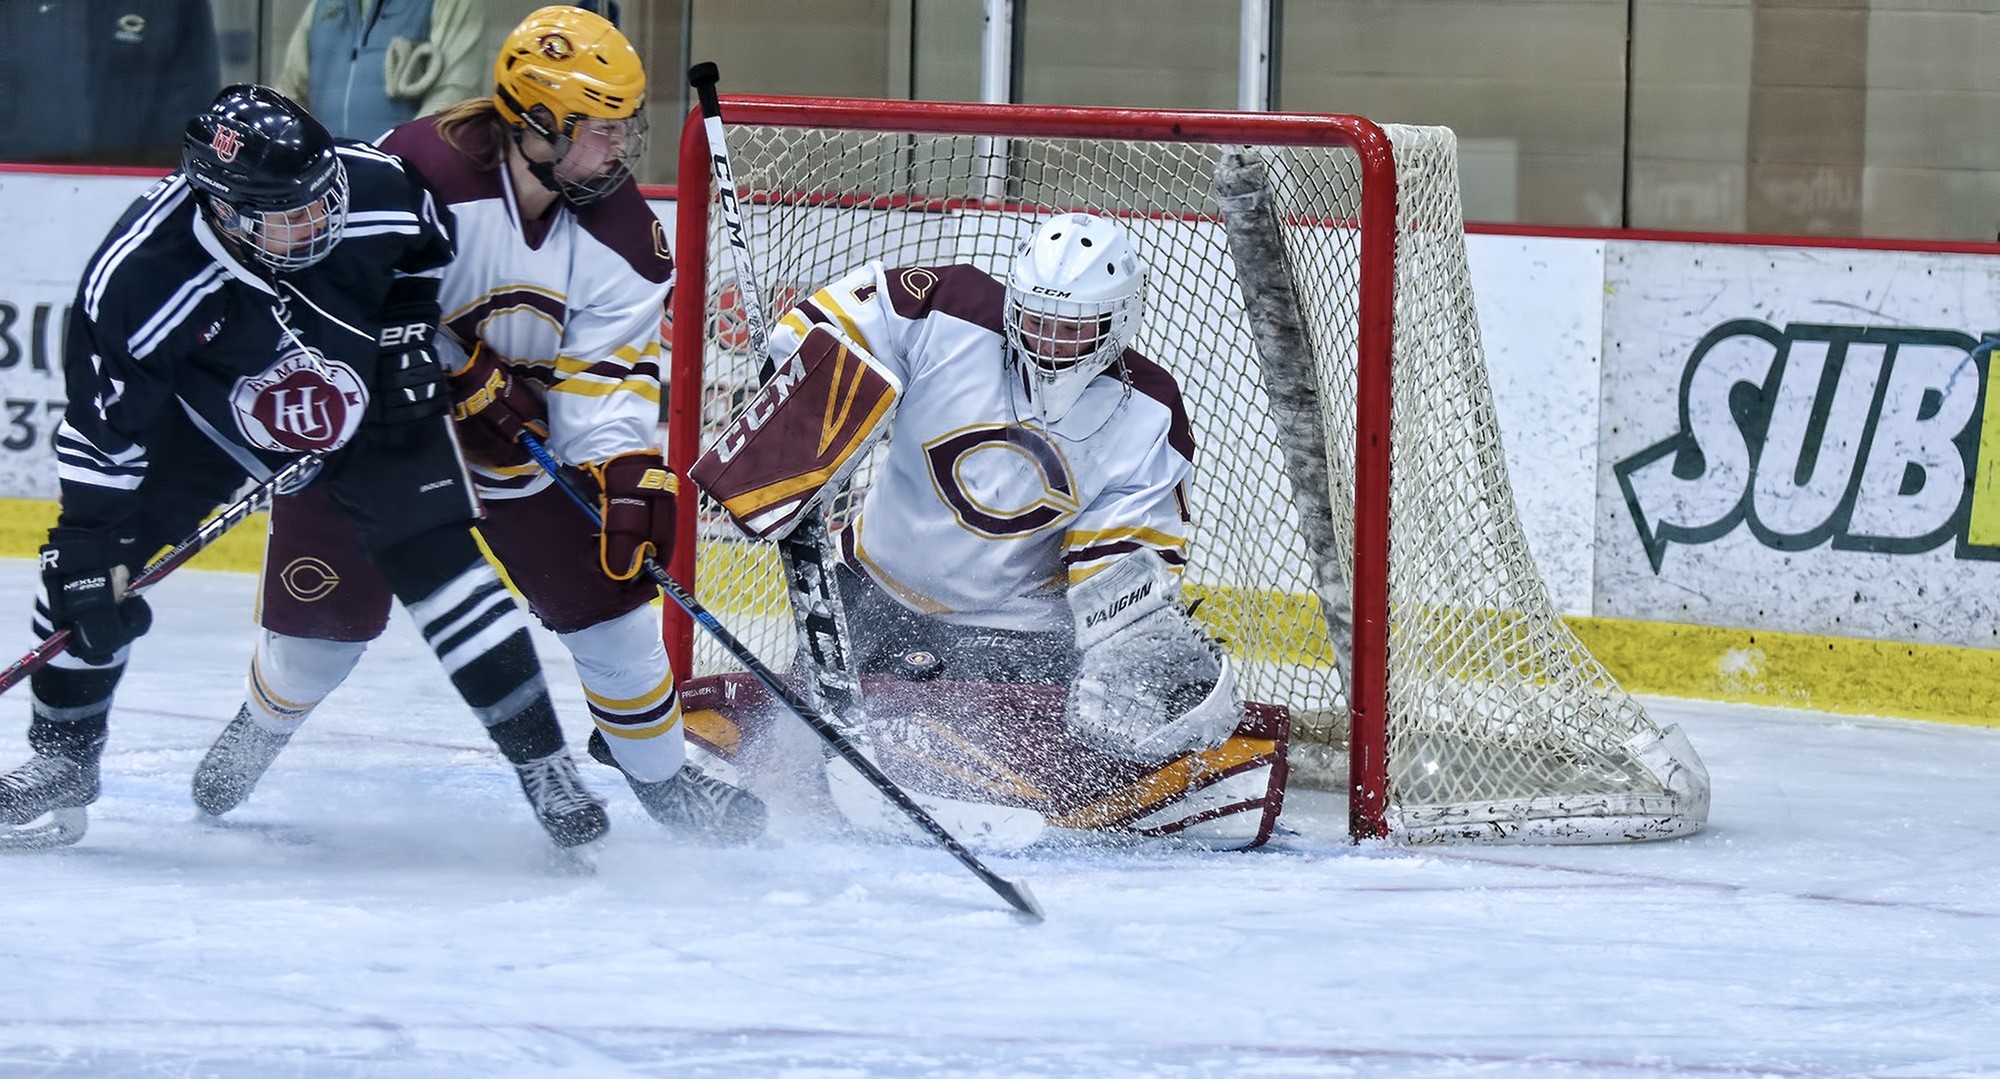 Freshman Kiana Flaig makes a save in the second period of the Cobbers' game with #9 Hamline. Flaig stopped 80 shots in the 2-game series.